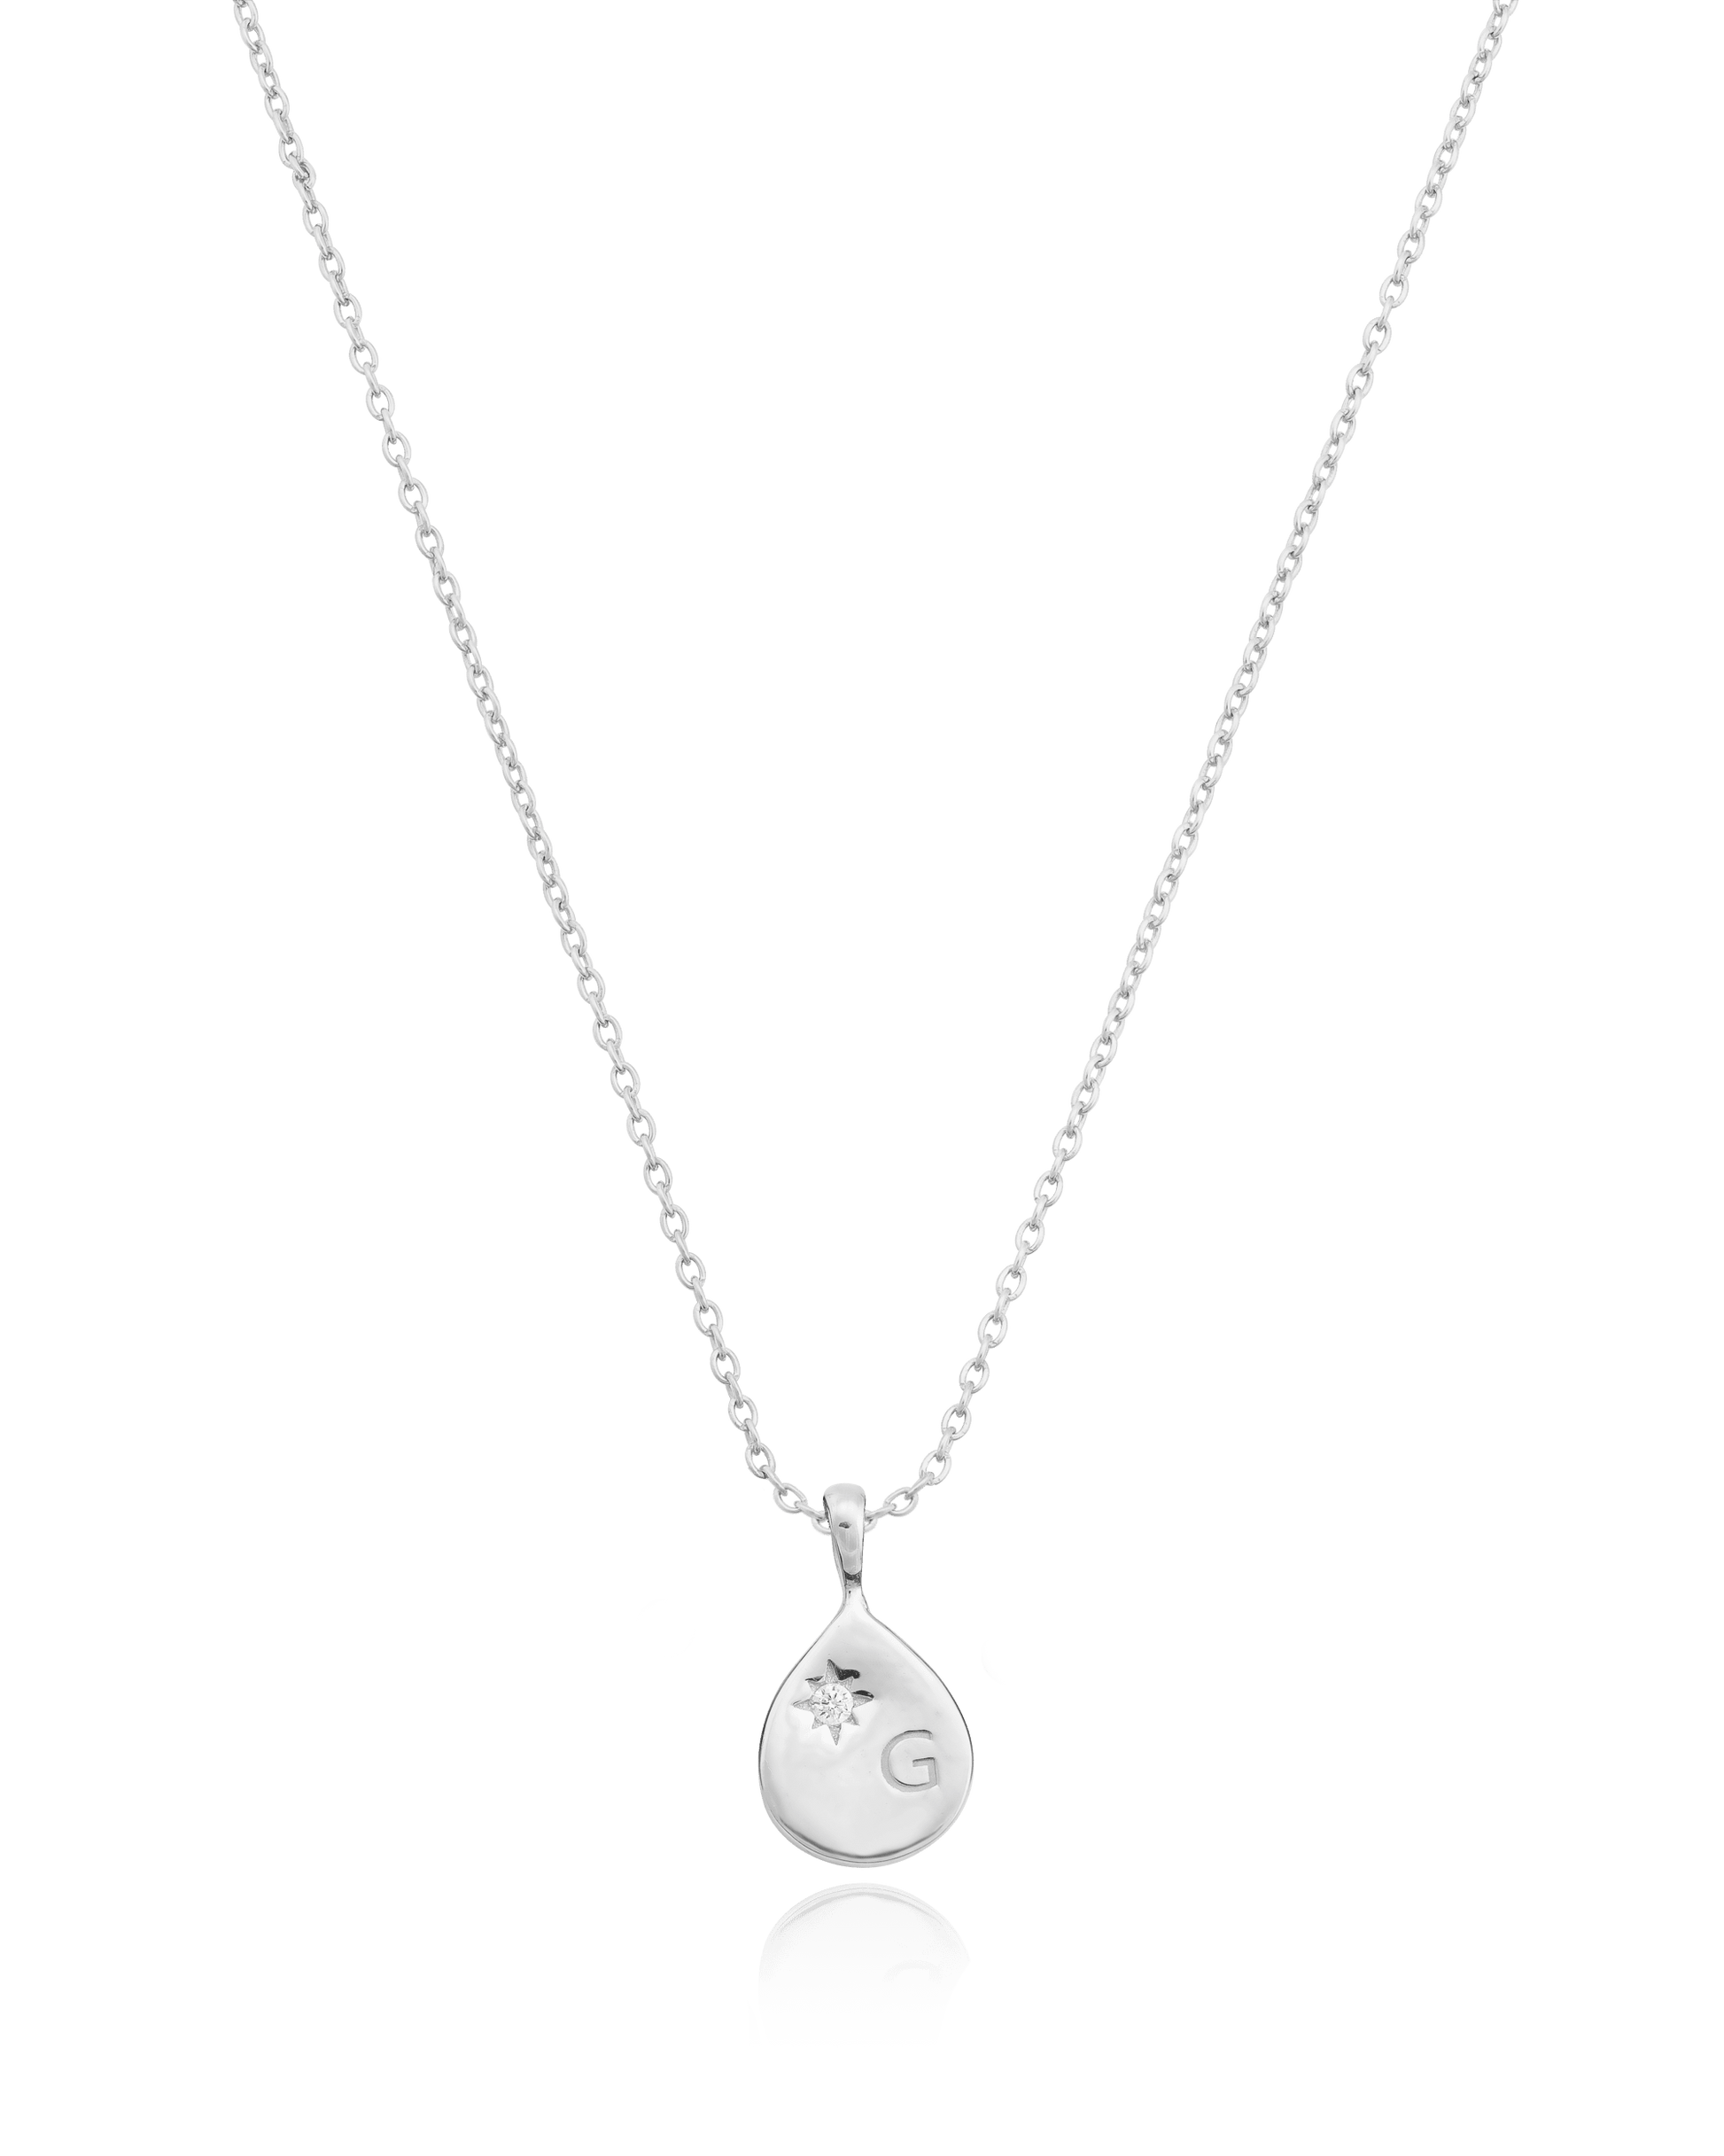 Diamond Drop Initial Necklace - 925 Sterling Silver Necklaces magal-dev 1 Drop 16”+2” extender 